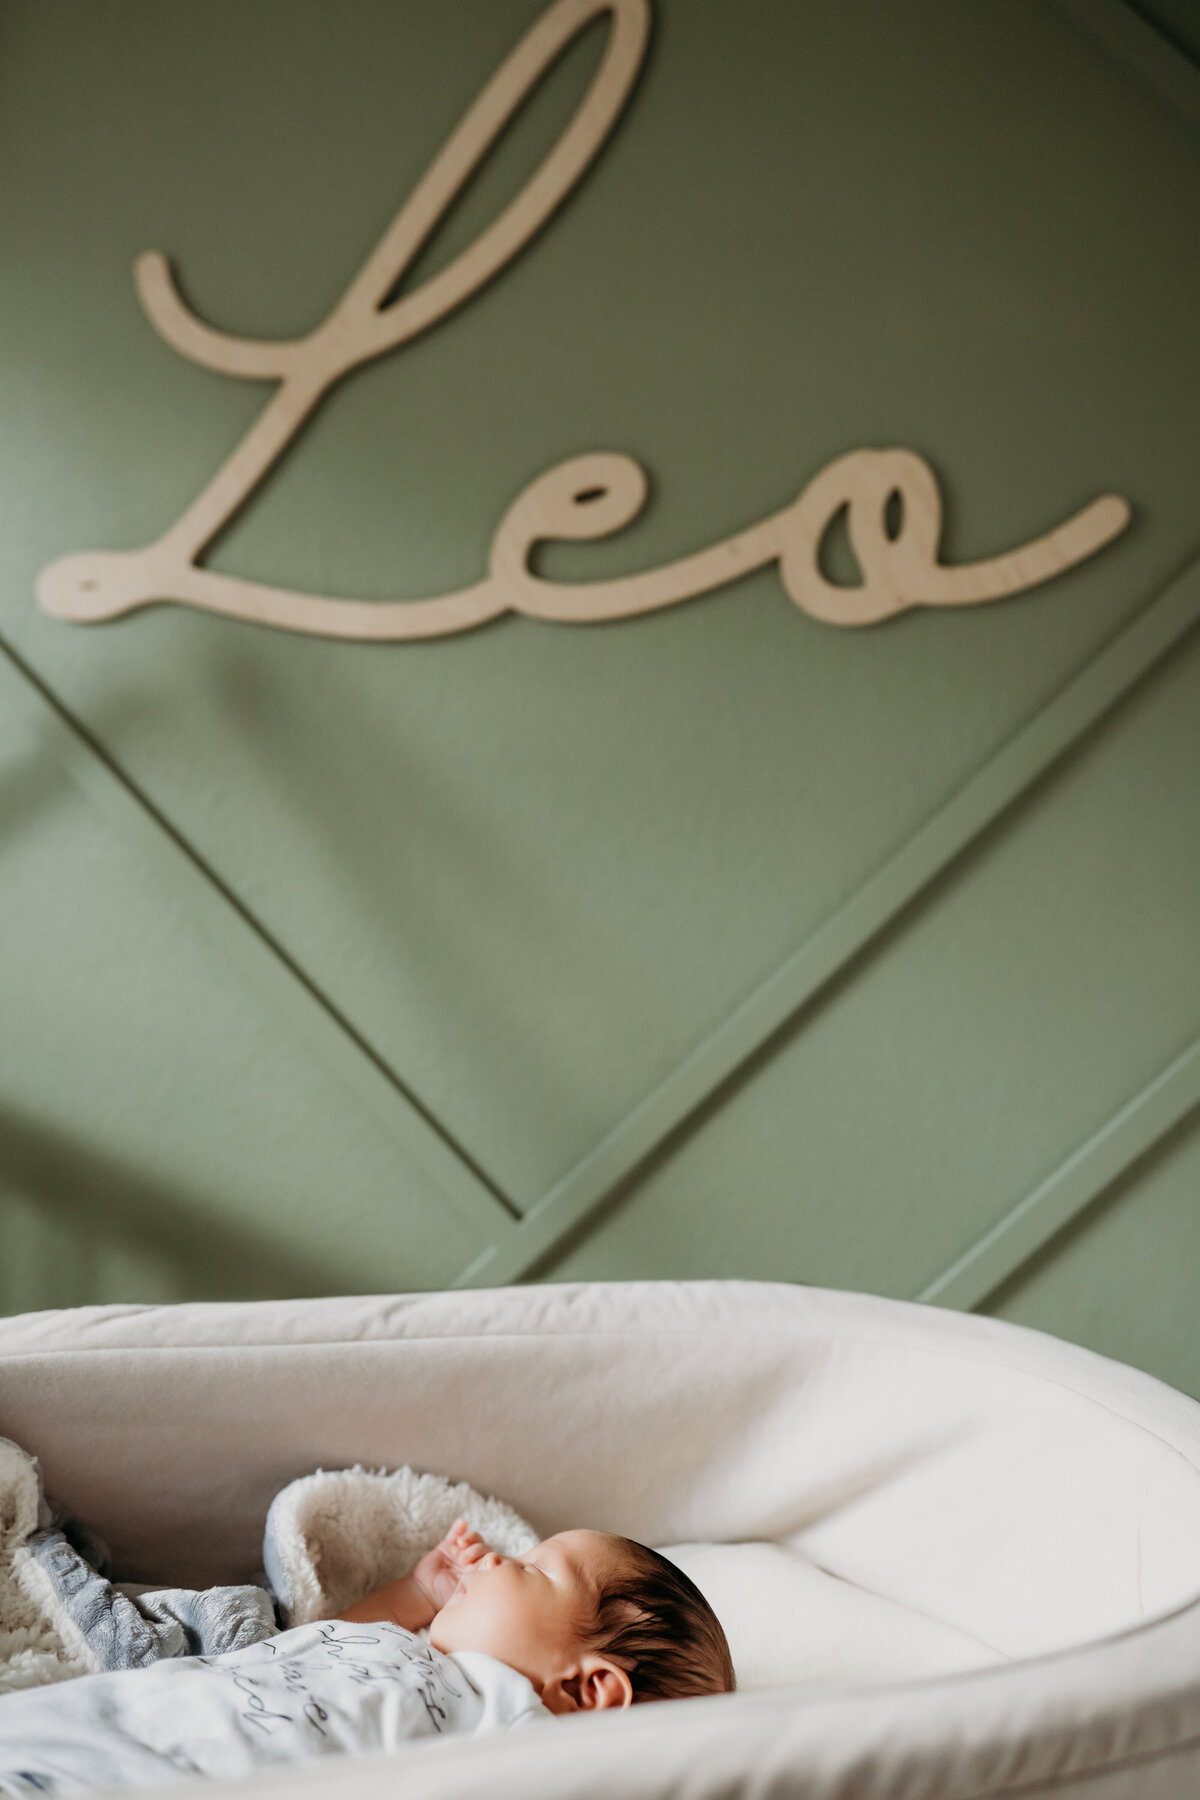 Newborn Photographer,  a baby lays in a bassinet under a script wooden emblem on the wall that reads "leo"